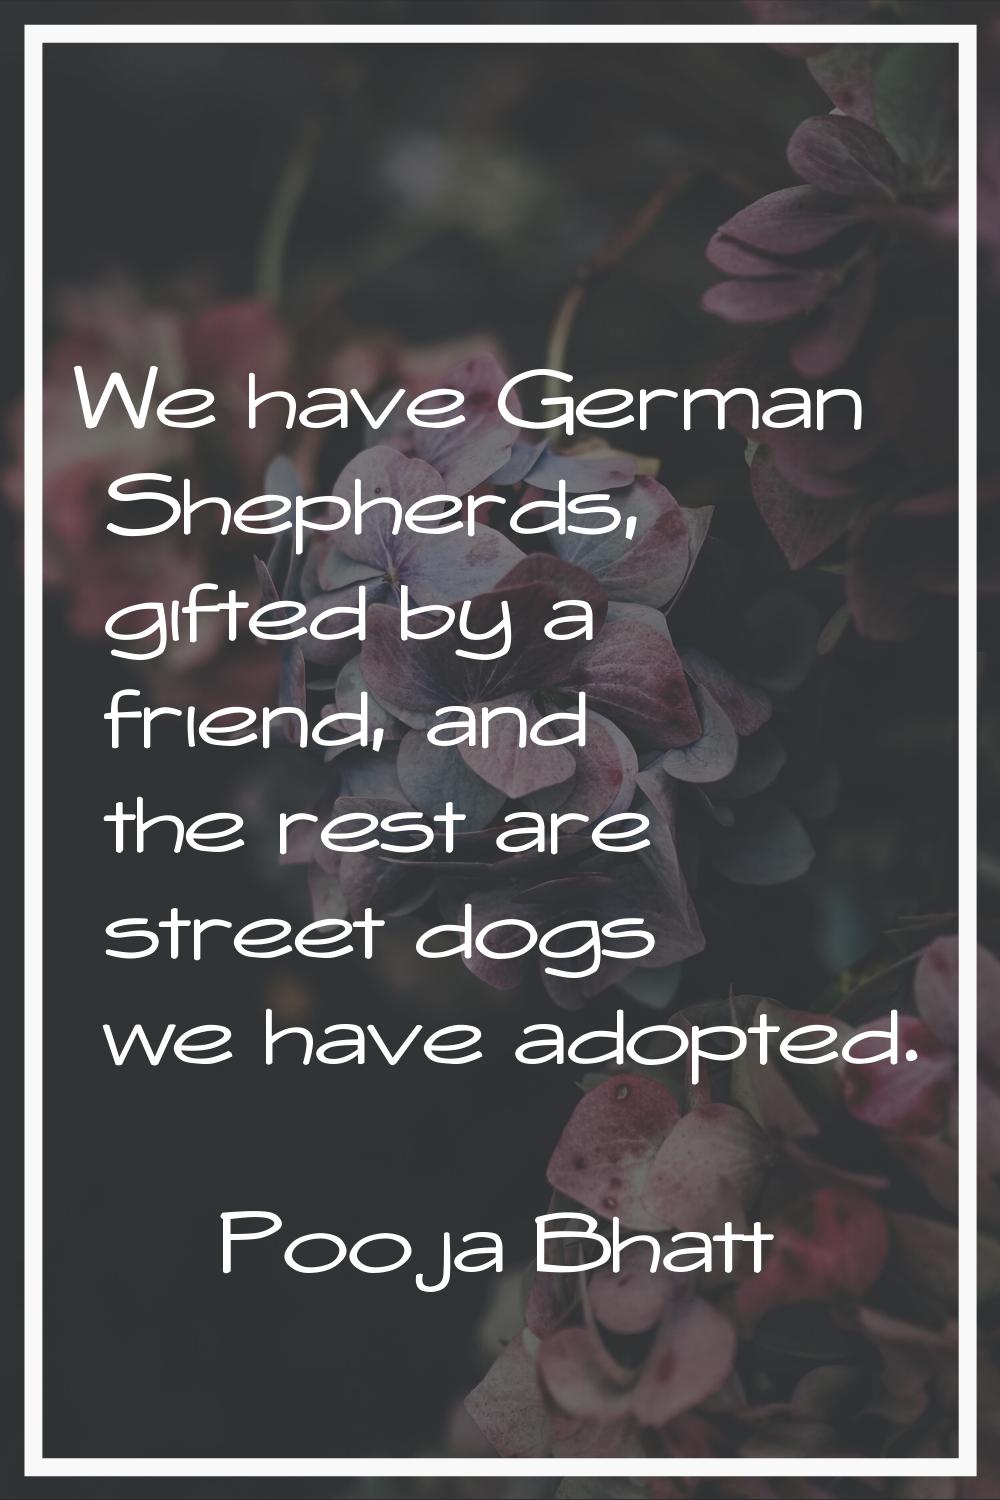 We have German Shepherds, gifted by a friend, and the rest are street dogs we have adopted.